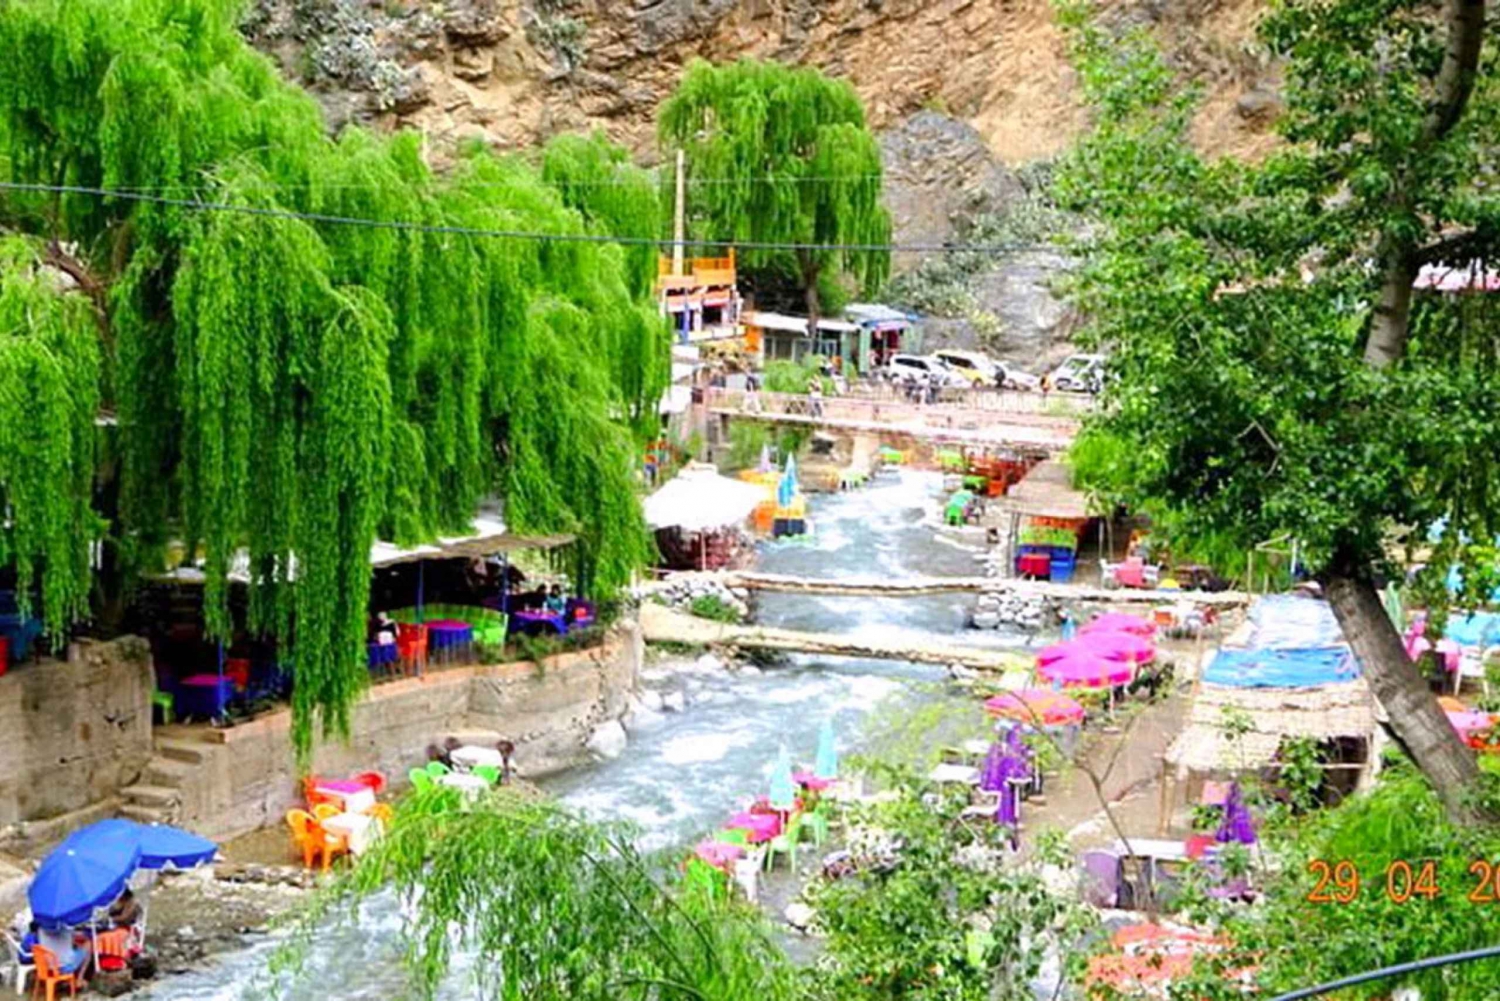 From Marrakech: Ourika Valley & Atlas Mountains Day Trip